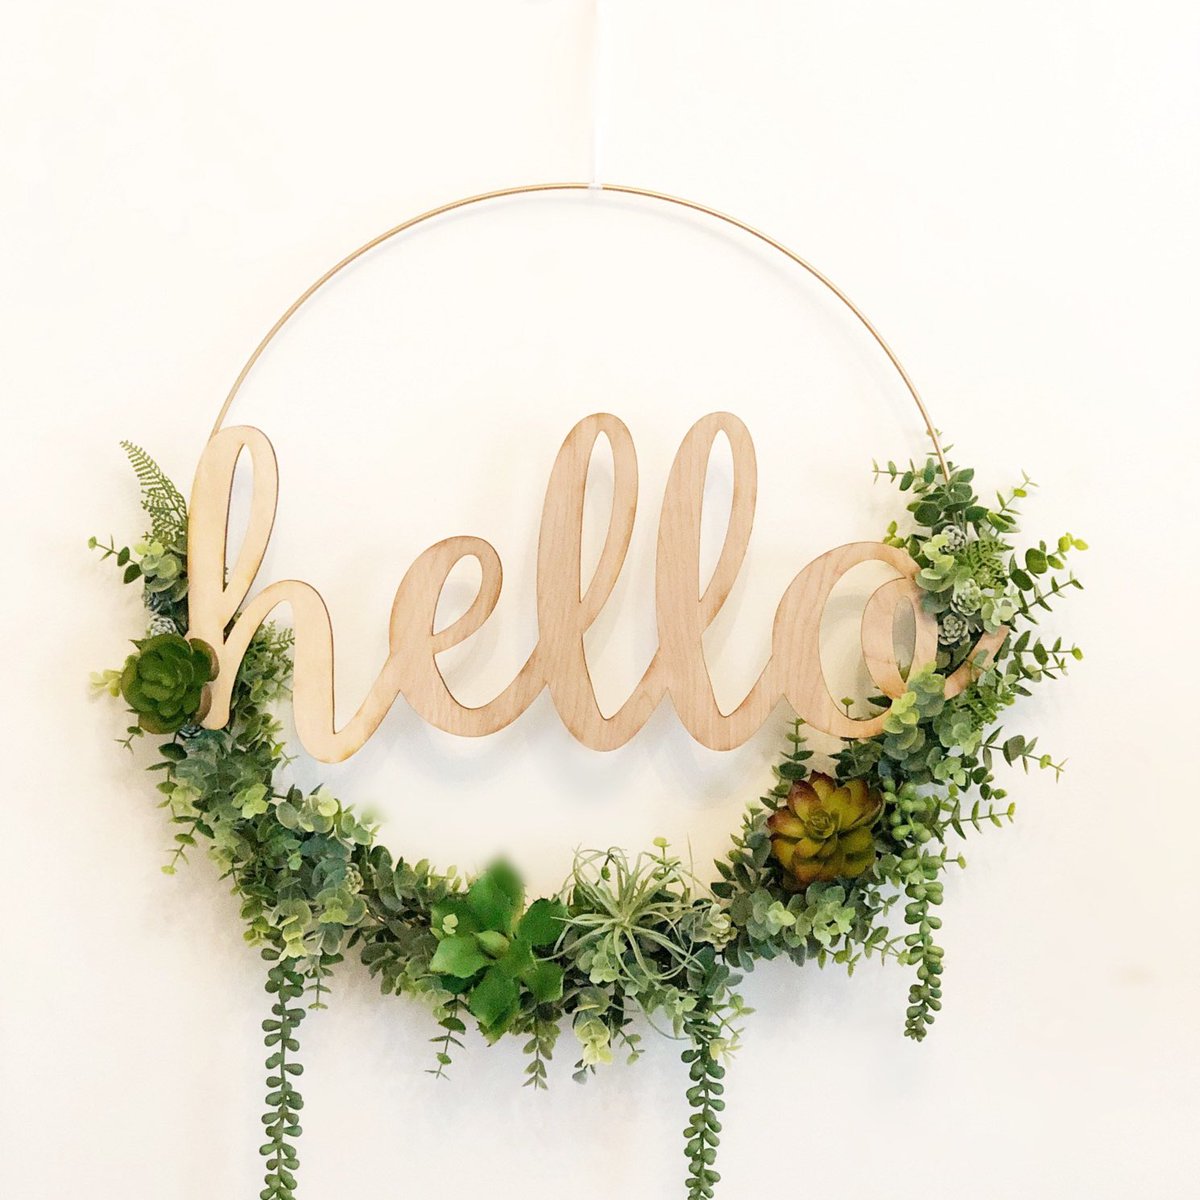 Excited to share this item from my #etsy shop: Farmhouse Style Wreath, Hello Hoop Wreath #mothersday #housewarming #farmhousewreath #lasercutwood #succulentwreath #airplants #wreathsucculents #greensucculents #modernhomedecor etsy.me/3LyilTp